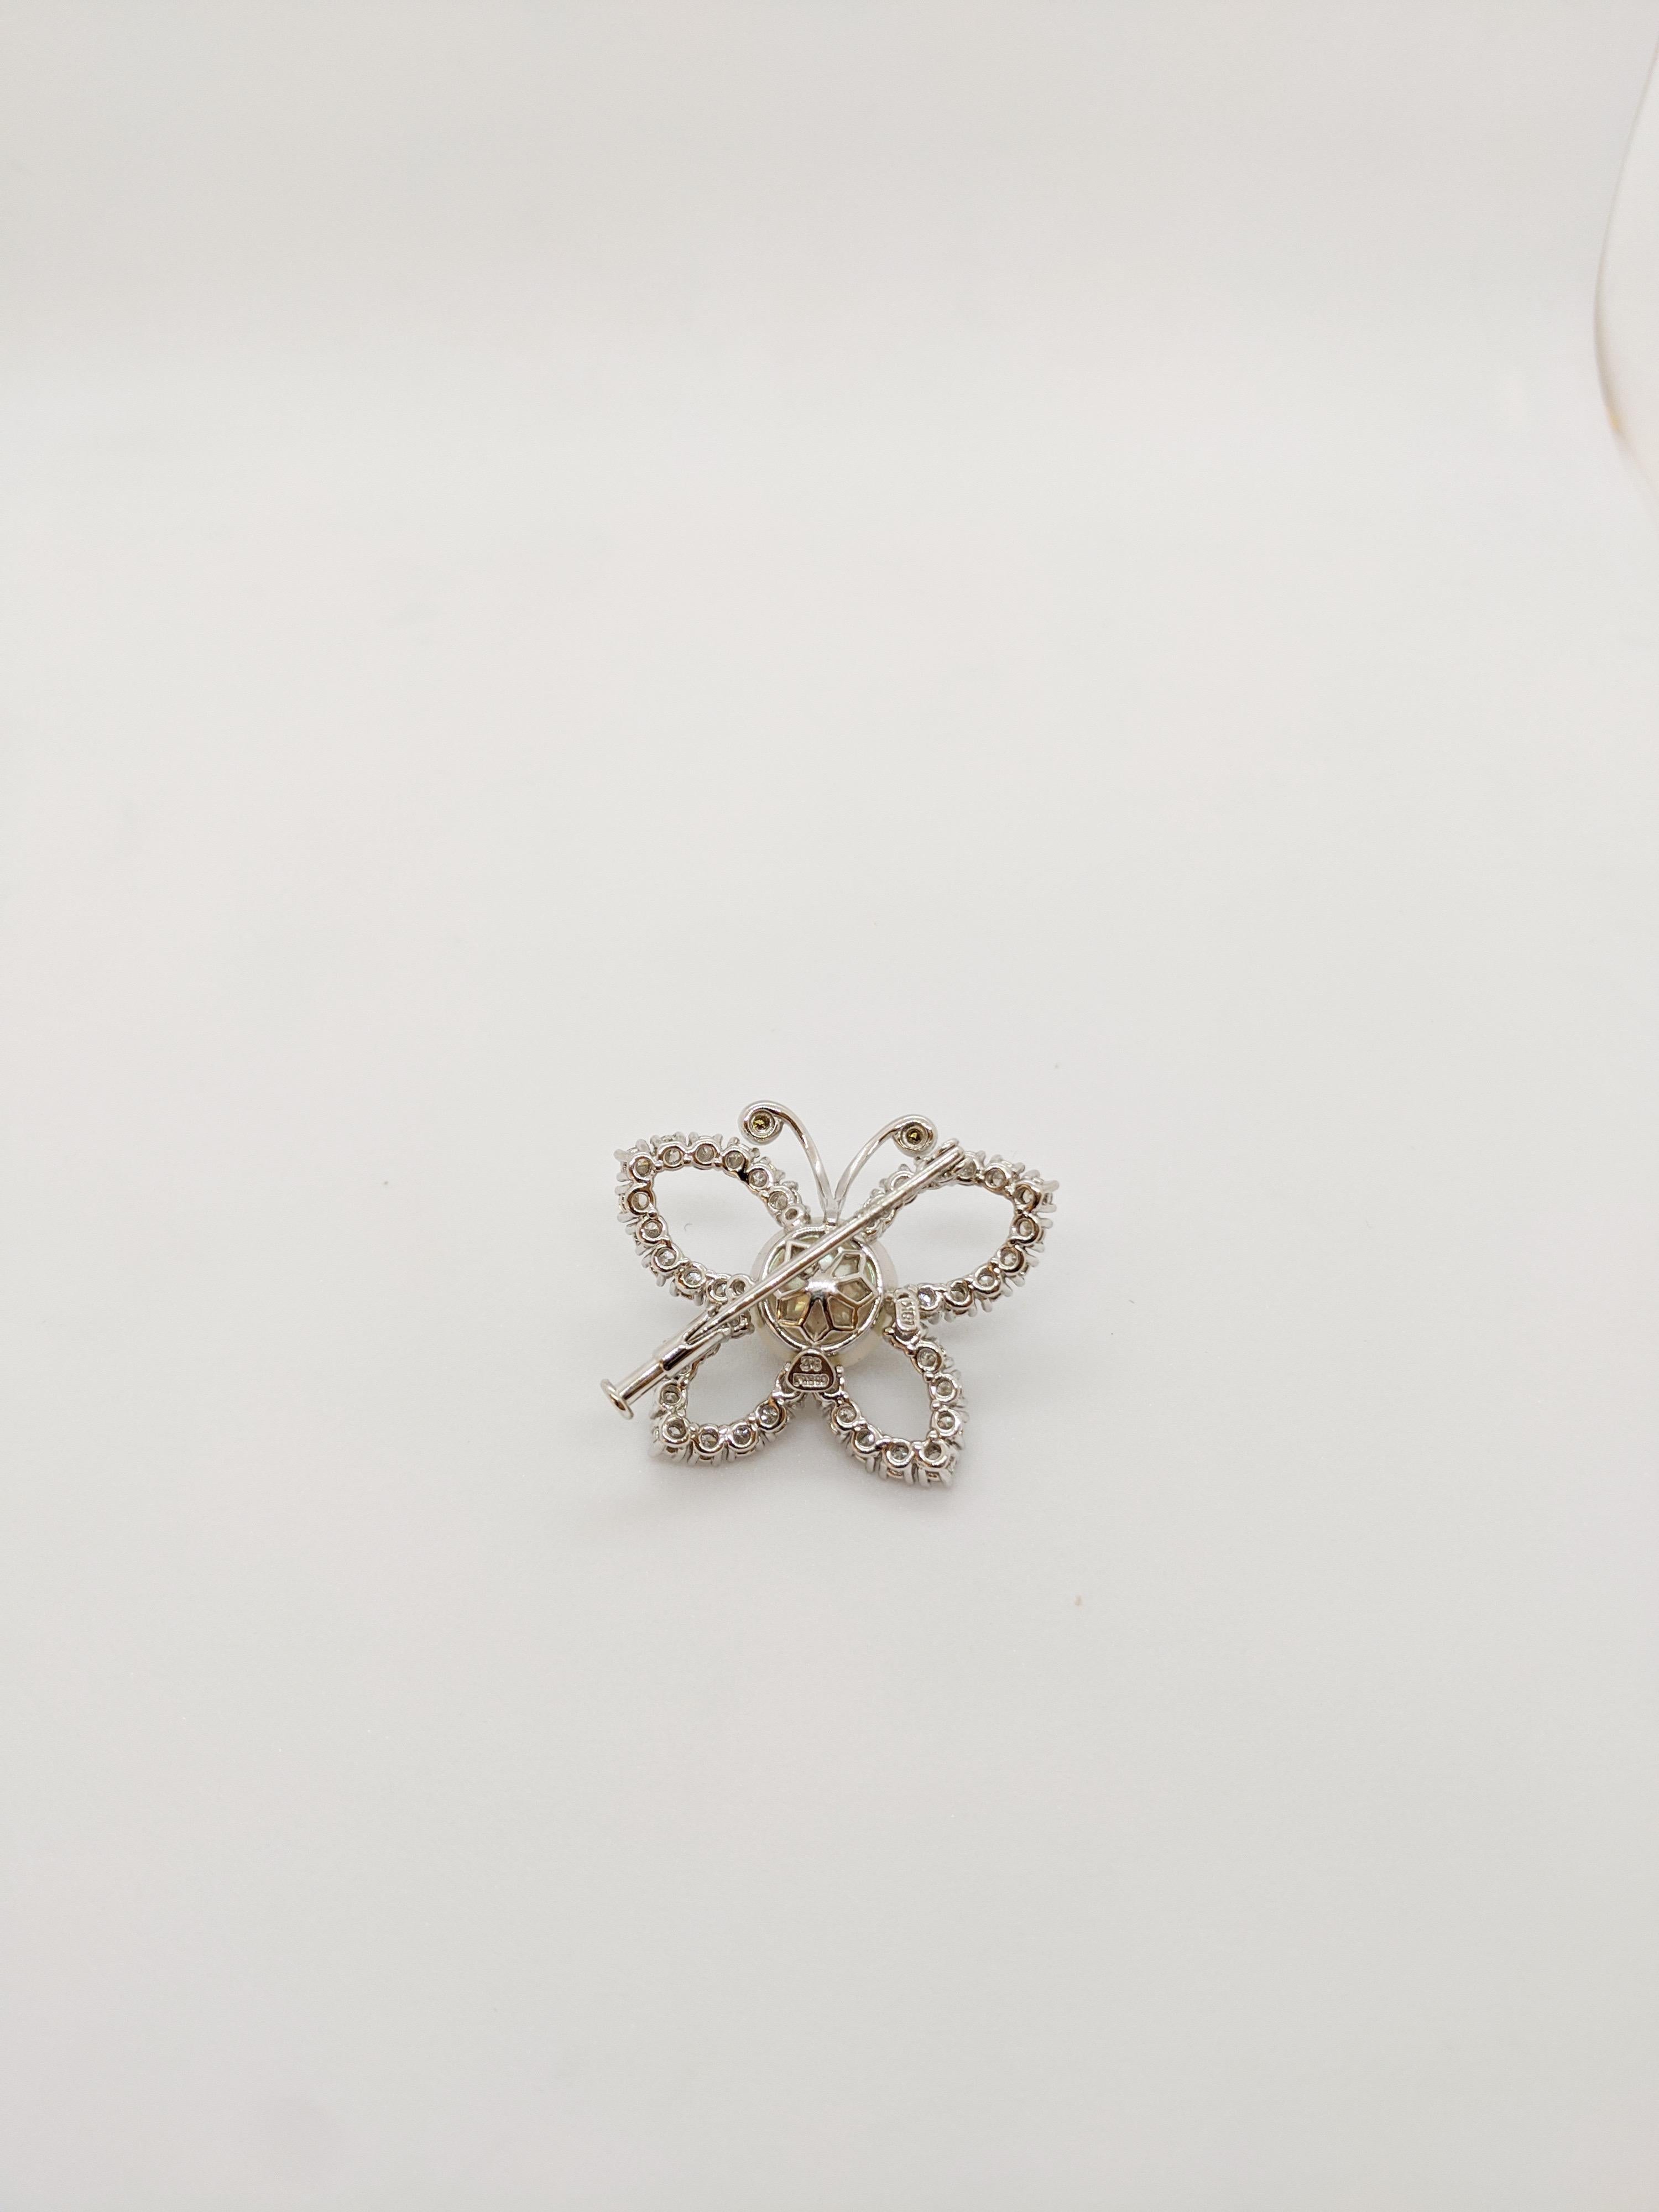 Round Cut Platinum and 2.29 Carat Diamond Butterfly Brooch with South Sea Pearl Center For Sale